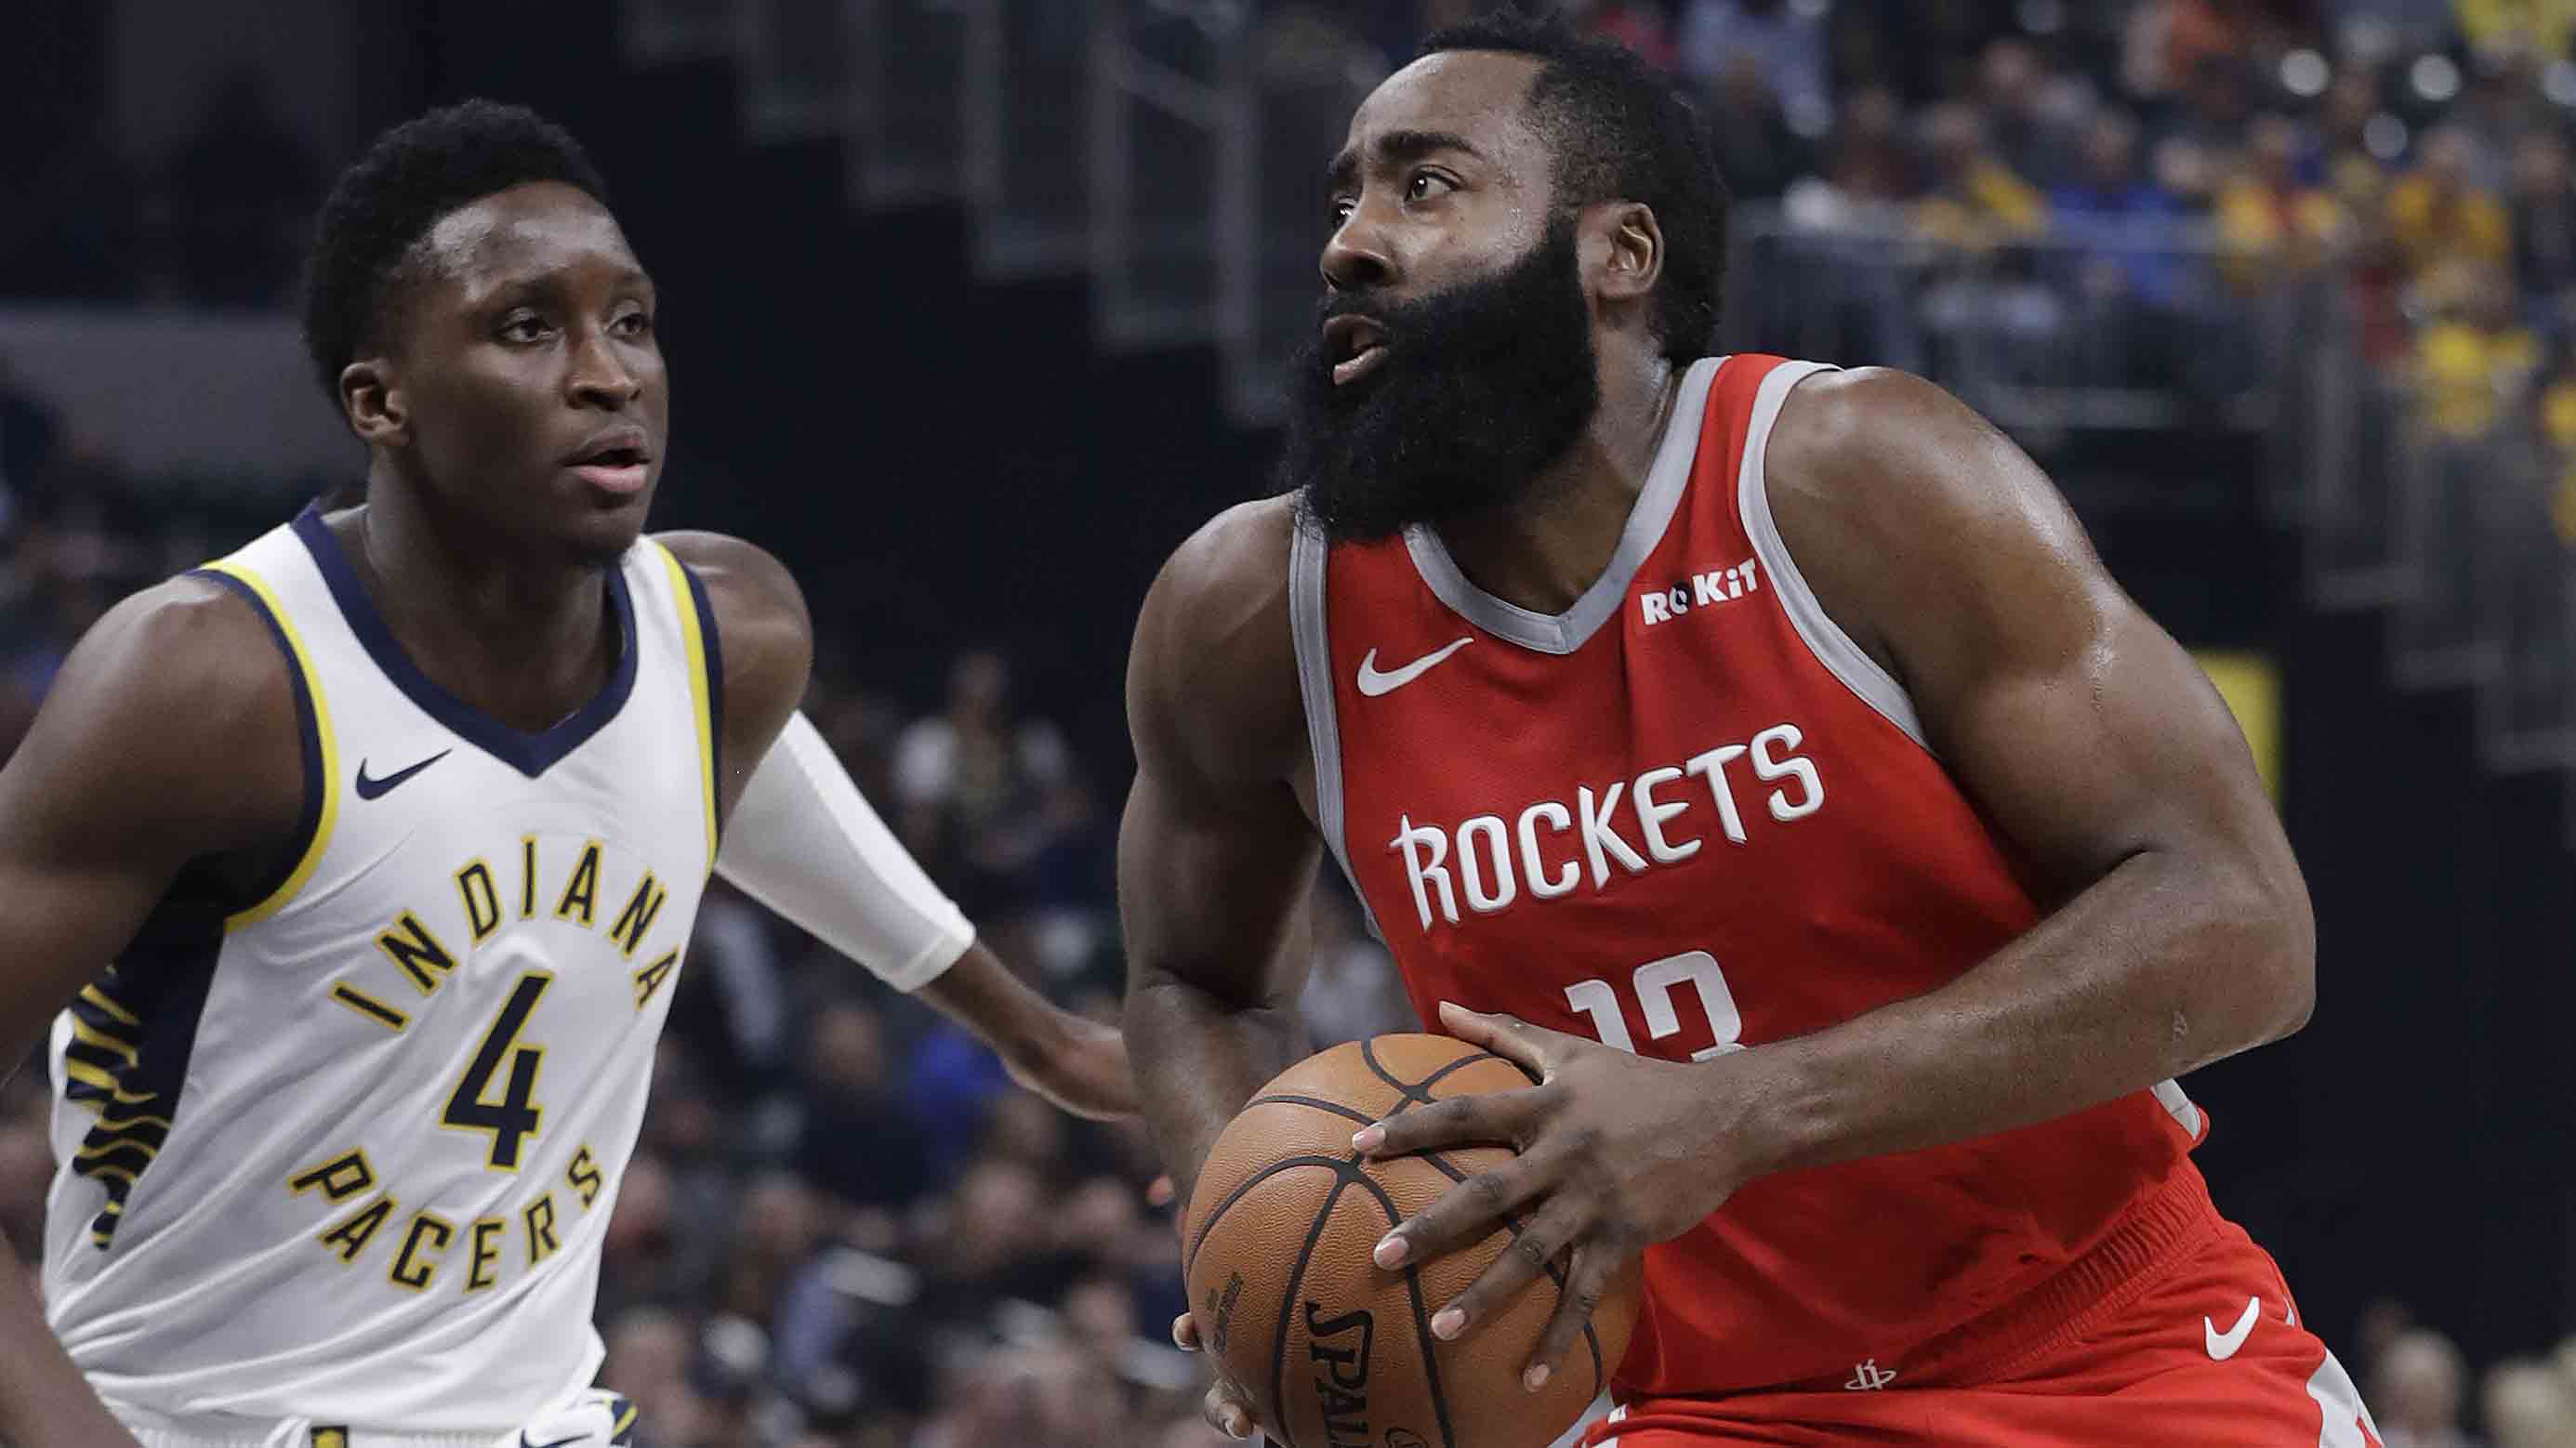 Pacers battle with Rockets but Houston pulls away with 98-94 win